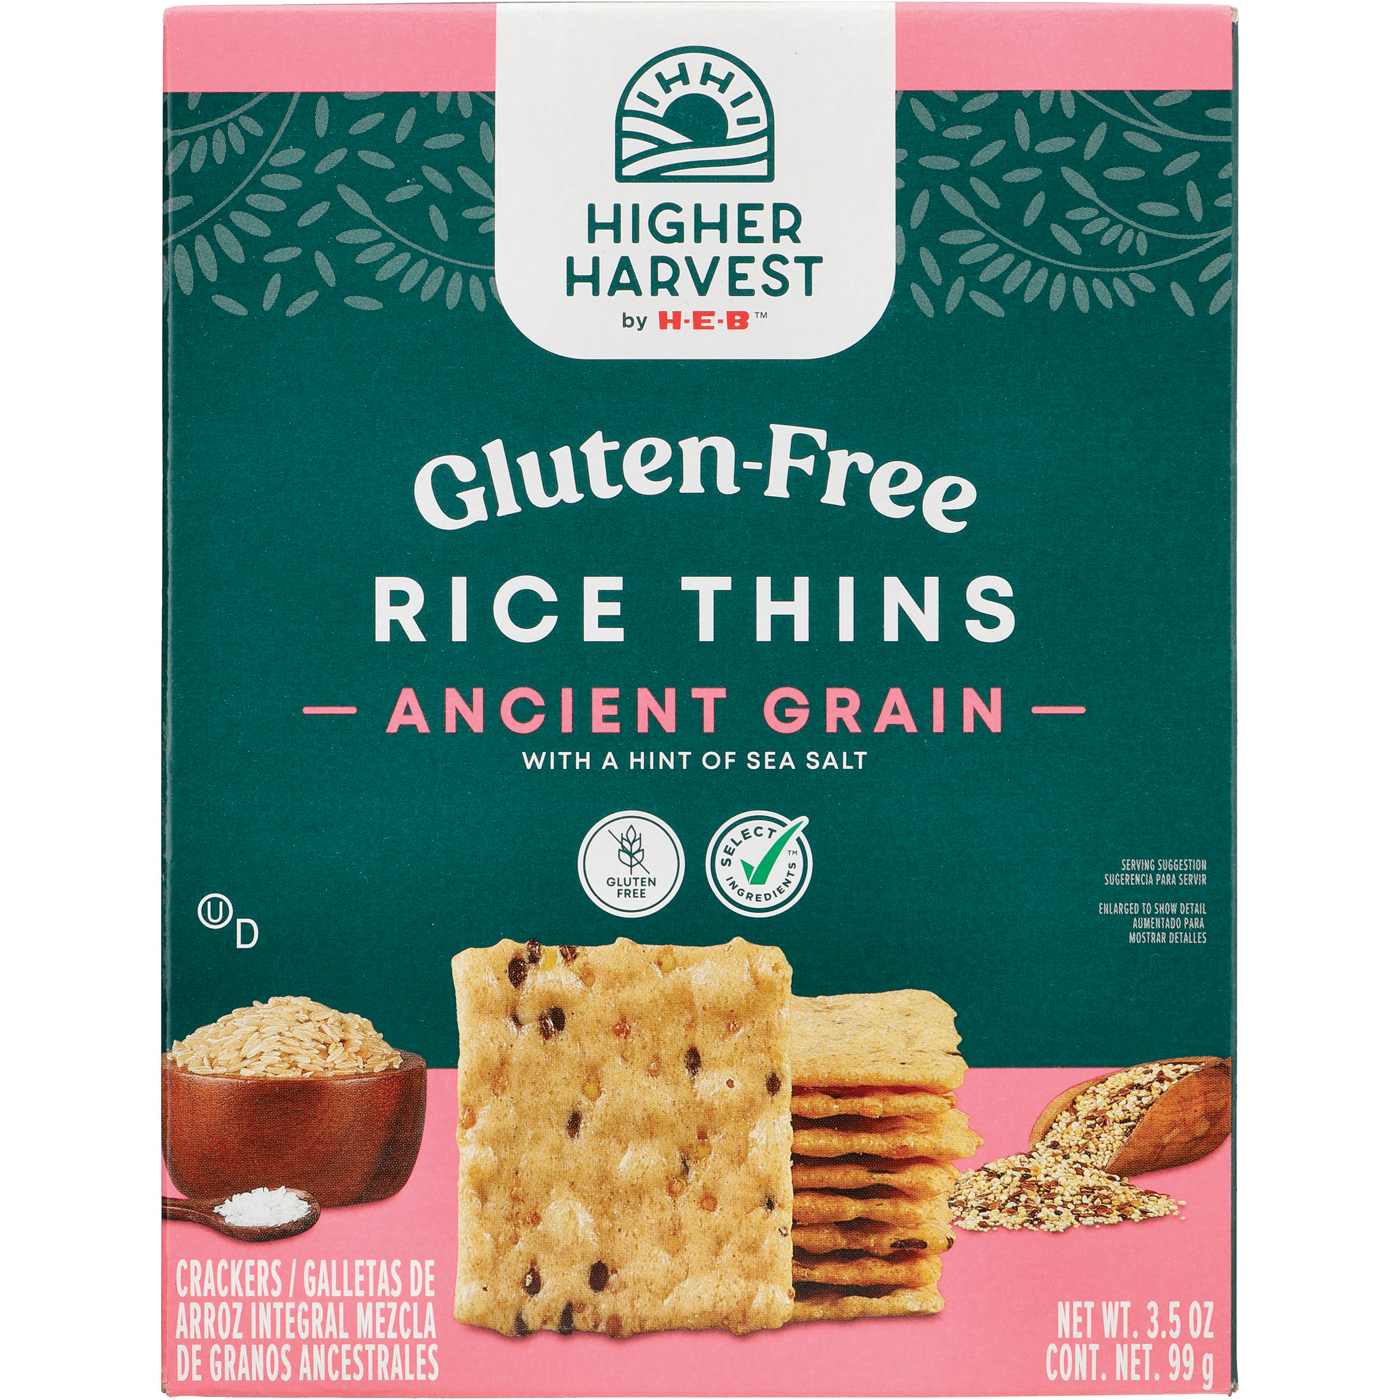 Higher Harvest by H-E-B Gluten-Free Rice Thins – Ancient Grain; image 1 of 3